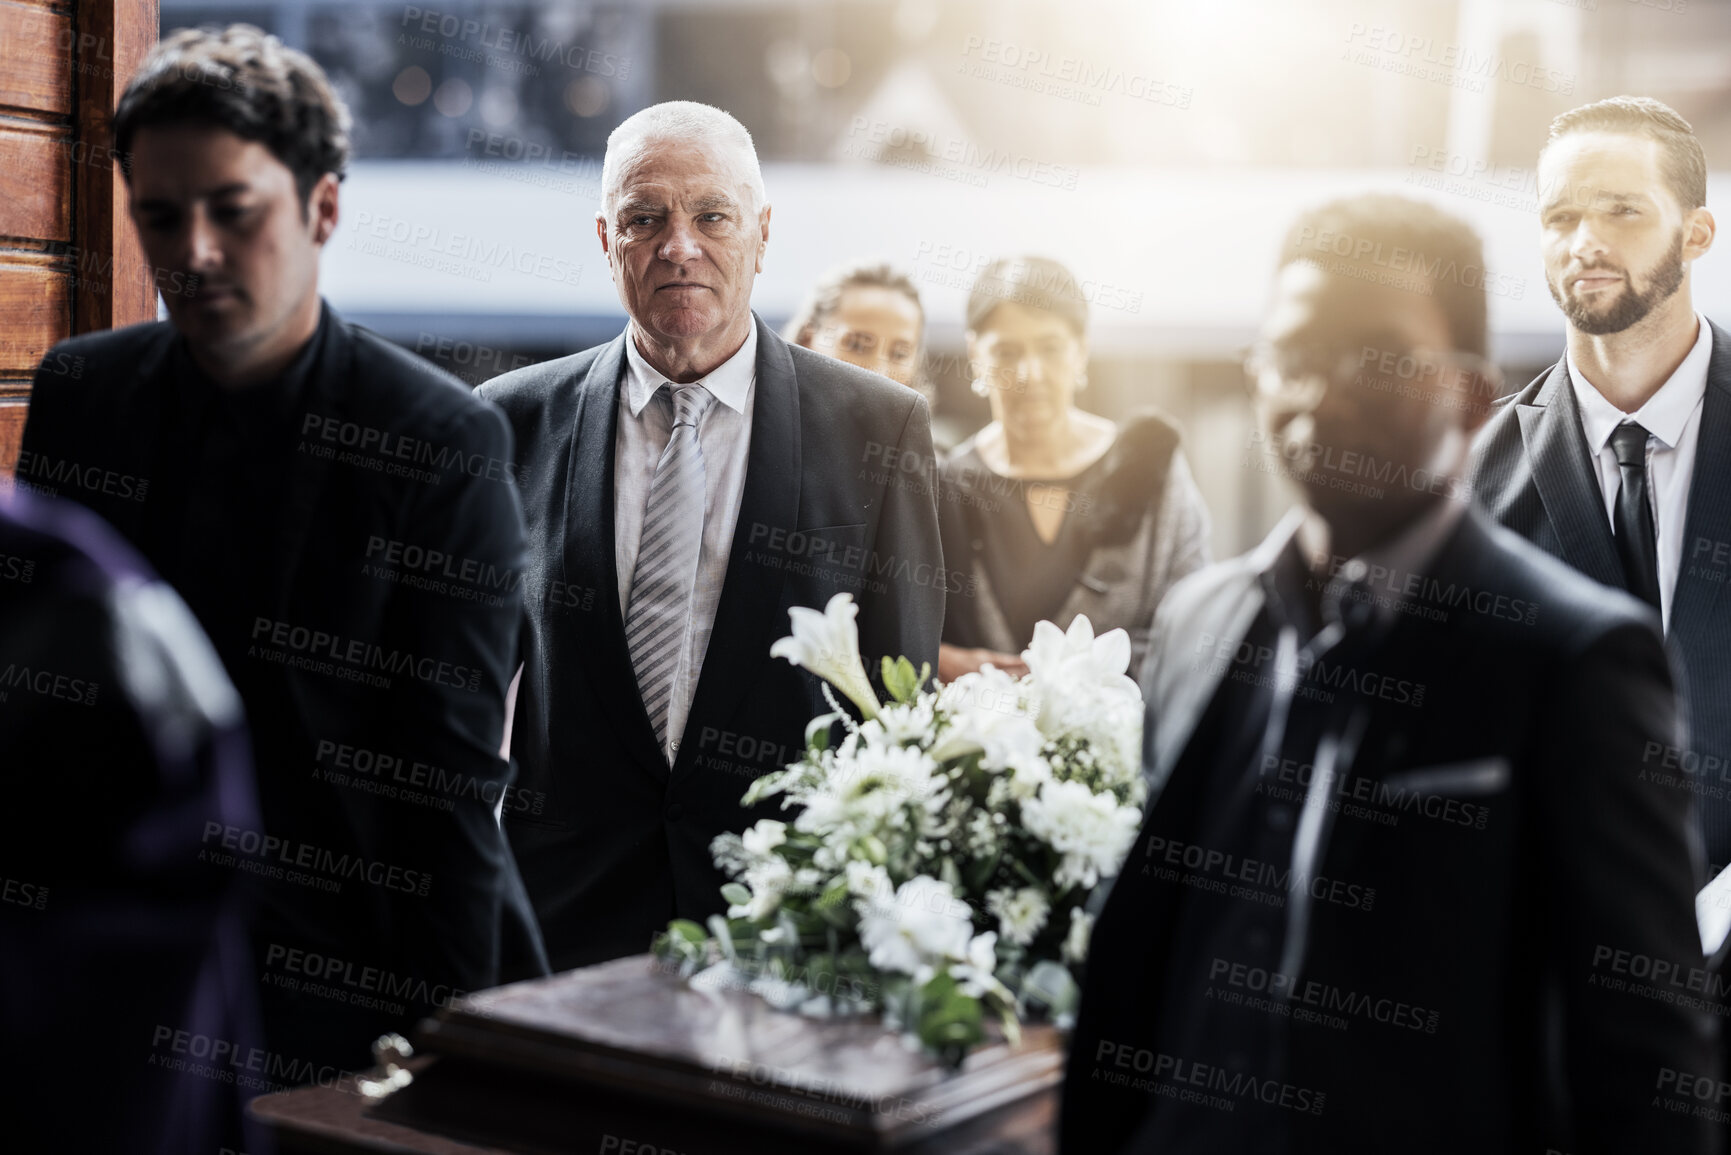 Buy stock photo Sad, funeral and people with coffin at church for service, mourning and grief over death. Flowers, depression and ceremony with family carrying casket in chapel for sorrow, support and loss together